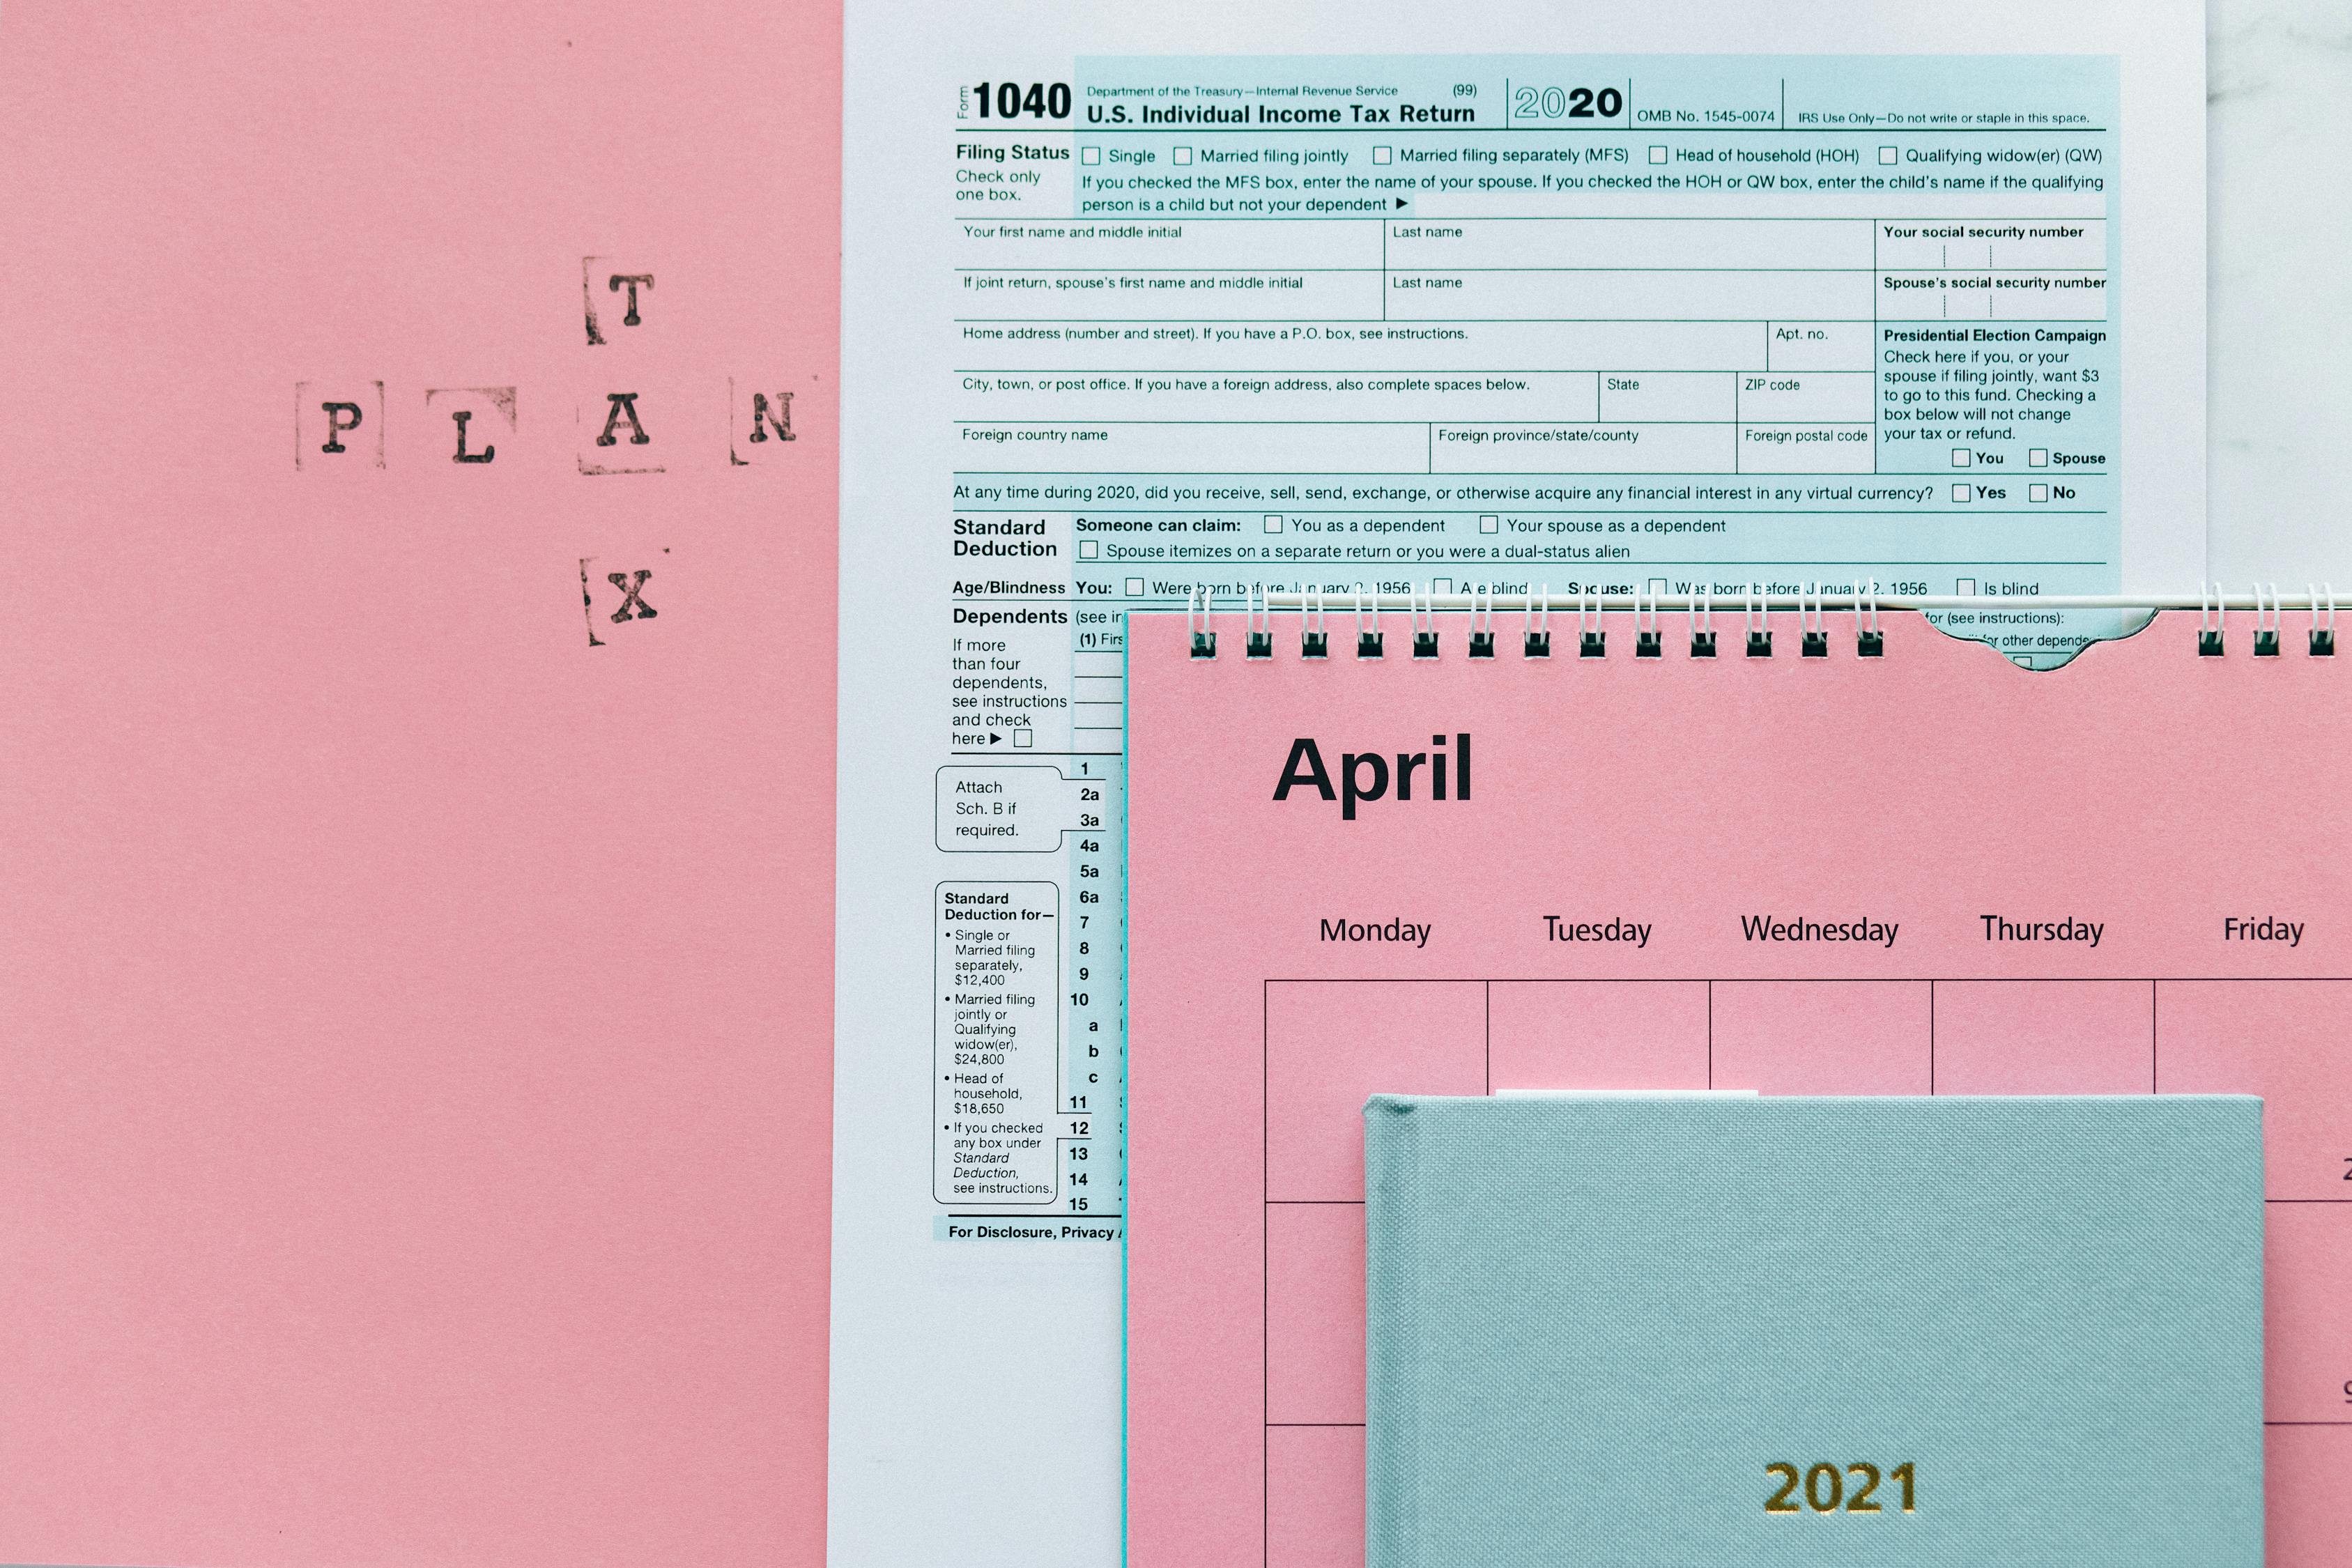 tax-return-form-and-2021-planner-on-pink-surface-free-stock-photo